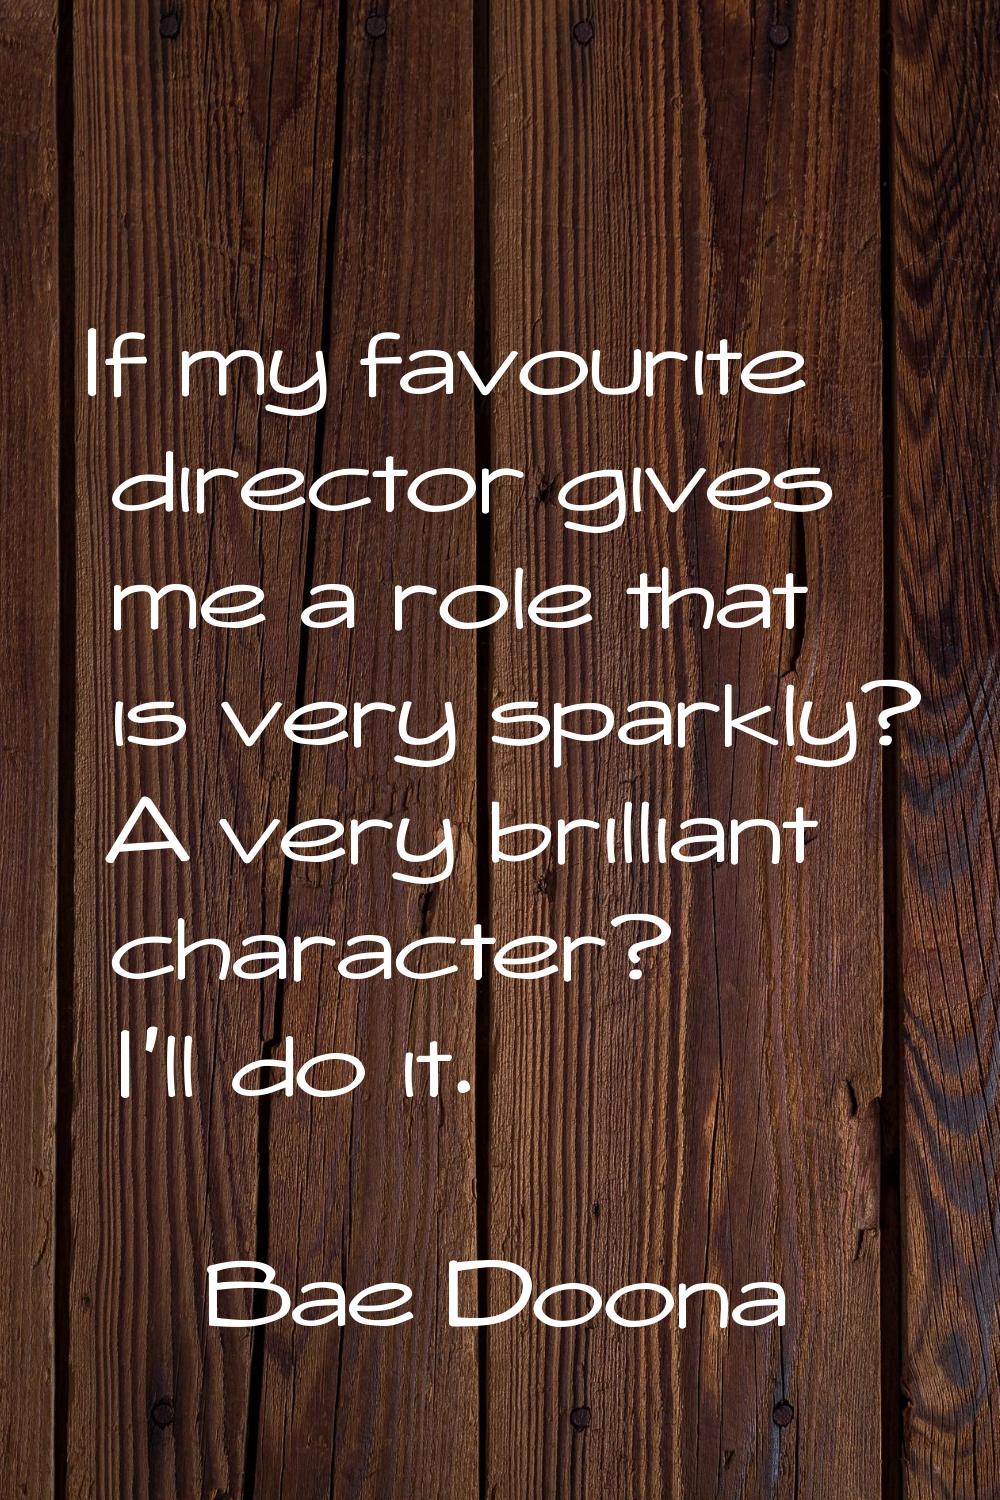 If my favourite director gives me a role that is very sparkly? A very brilliant character? I'll do 